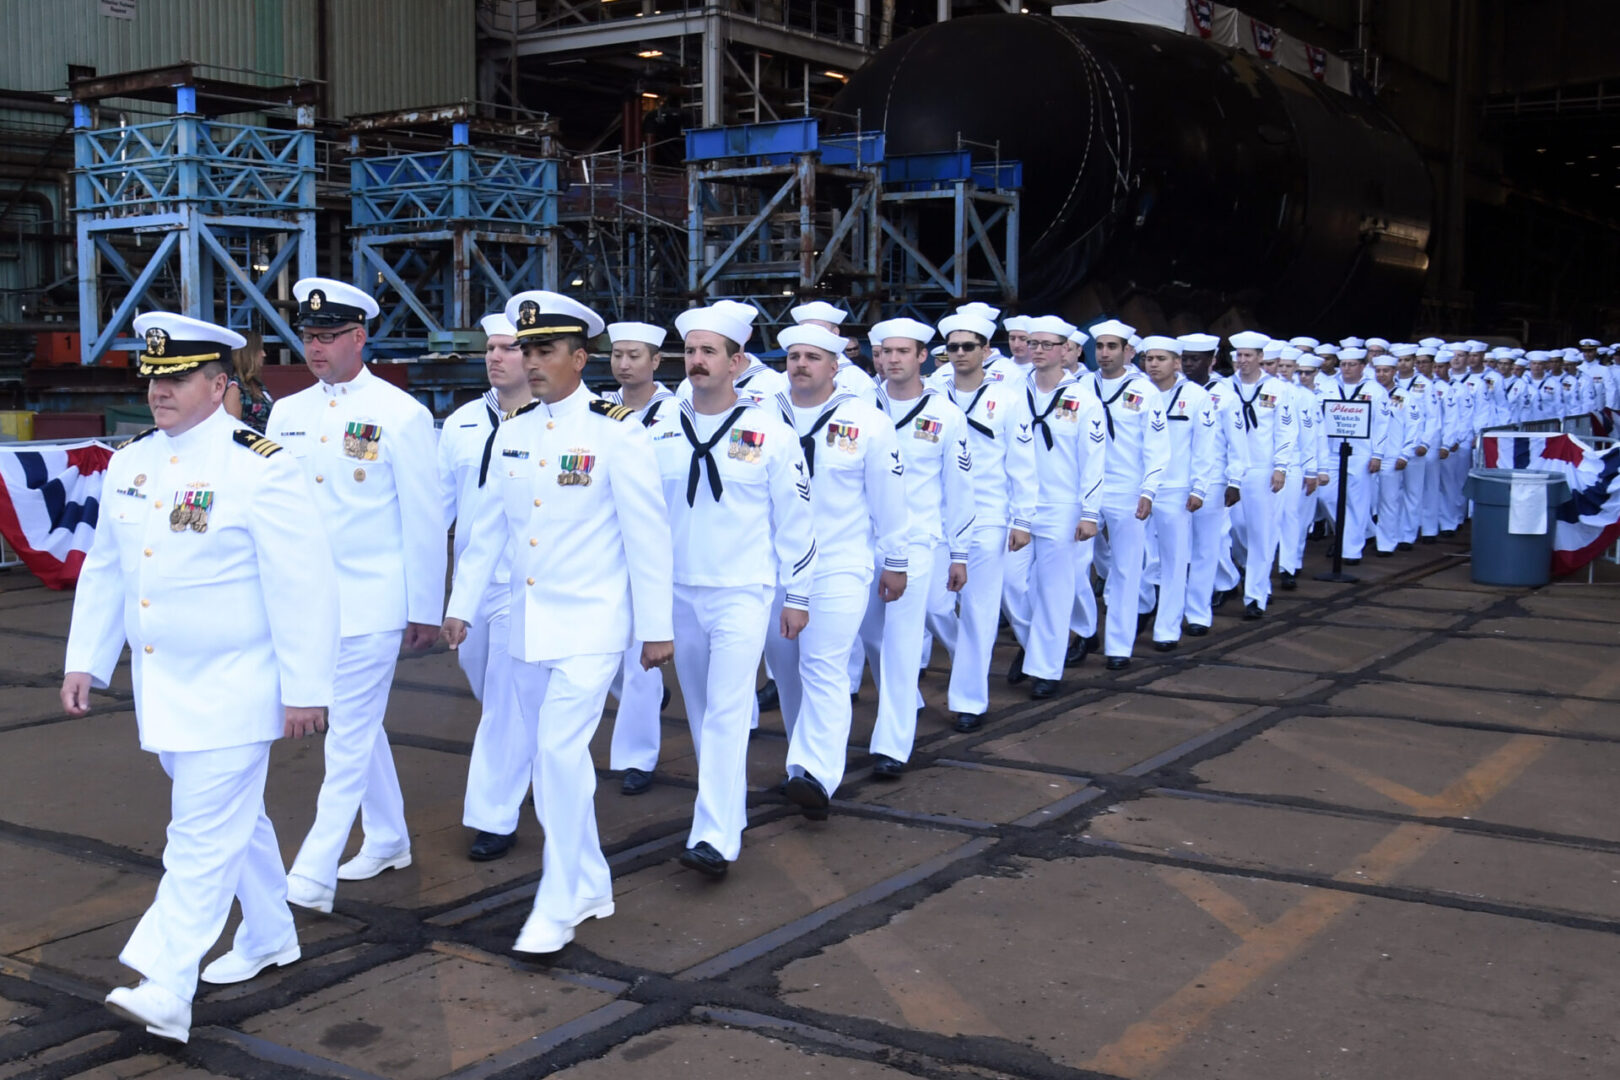 210731-N-GR655-002 GROTON, Conn. (July 31, 2021) – The crew of the pre-commissioning unit (PCU) Hyman G. Rickover (SSN 795) march in formation during a christening ceremony at General Dynamics Electric Boat shipyard facility in Groton, Conn., July 31, 2021. Rickover and crew will operate under Submarine Squadron (SUBRON) FOUR whose primary mission is to provide attack submarines that are ready, willing, and able to meet the unique challenges of undersea combat and deployed operations in unforgiving environments across the globe. (U.S. Navy photo by Chief Petty Officer Joshua Karsten/RELEASED)